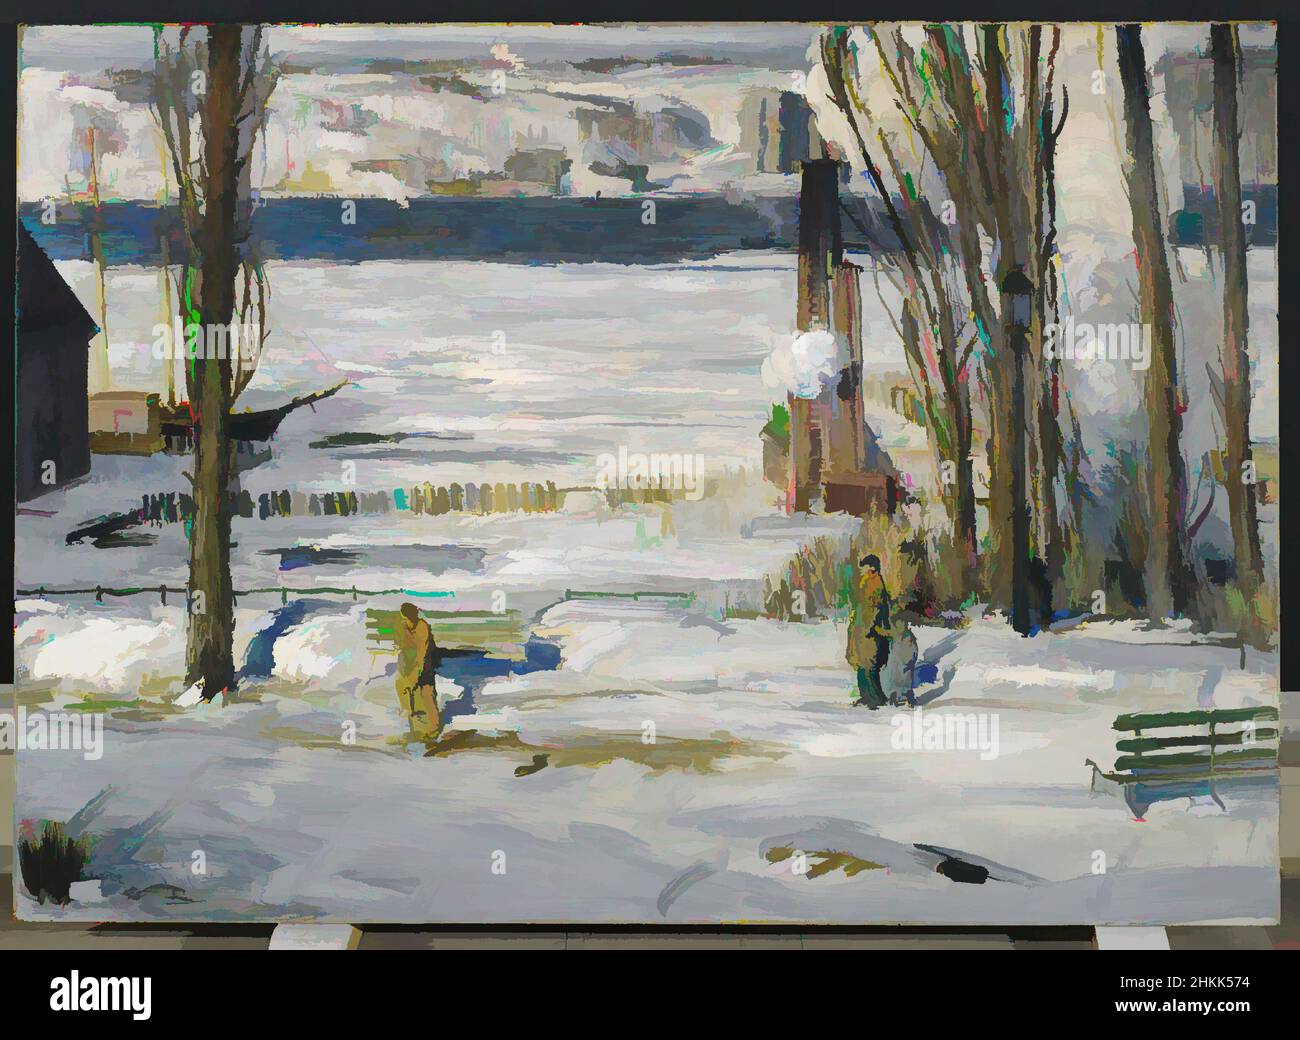 Art inspired by A Morning Snow--Hudson River, George Wesley Bellows, American, 1882-1925, Oil on canvas, 1910, 45 1/16 x 63 3/16 in., 114.5 x 160.5 cm, A morning snow - Hudson River, American, American artist, American painting, American realism, Ashcan School, Bellows, bench, benches, Classic works modernized by Artotop with a splash of modernity. Shapes, color and value, eye-catching visual impact on art. Emotions through freedom of artworks in a contemporary way. A timeless message pursuing a wildly creative new direction. Artists turning to the digital medium and creating the Artotop NFT Stock Photo